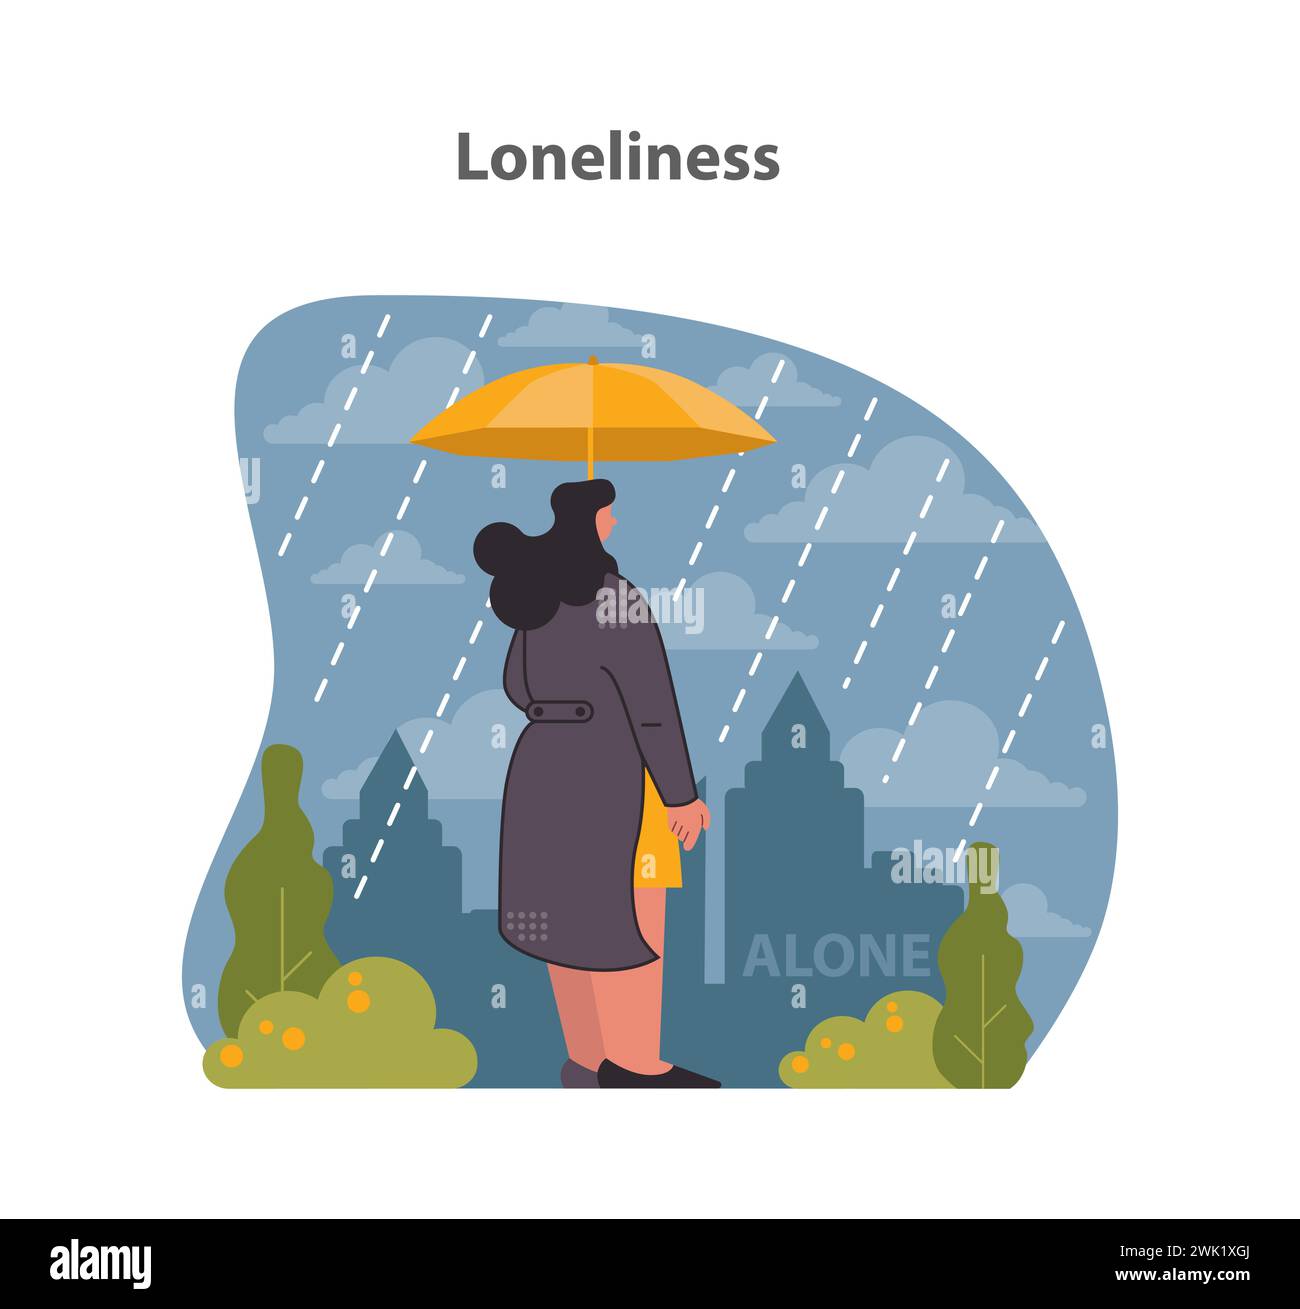 Loneliness visualized. Solitary figure against the city's backdrop, sheltered by a small umbrella in the rain. Flat vector illustration. Stock Vector